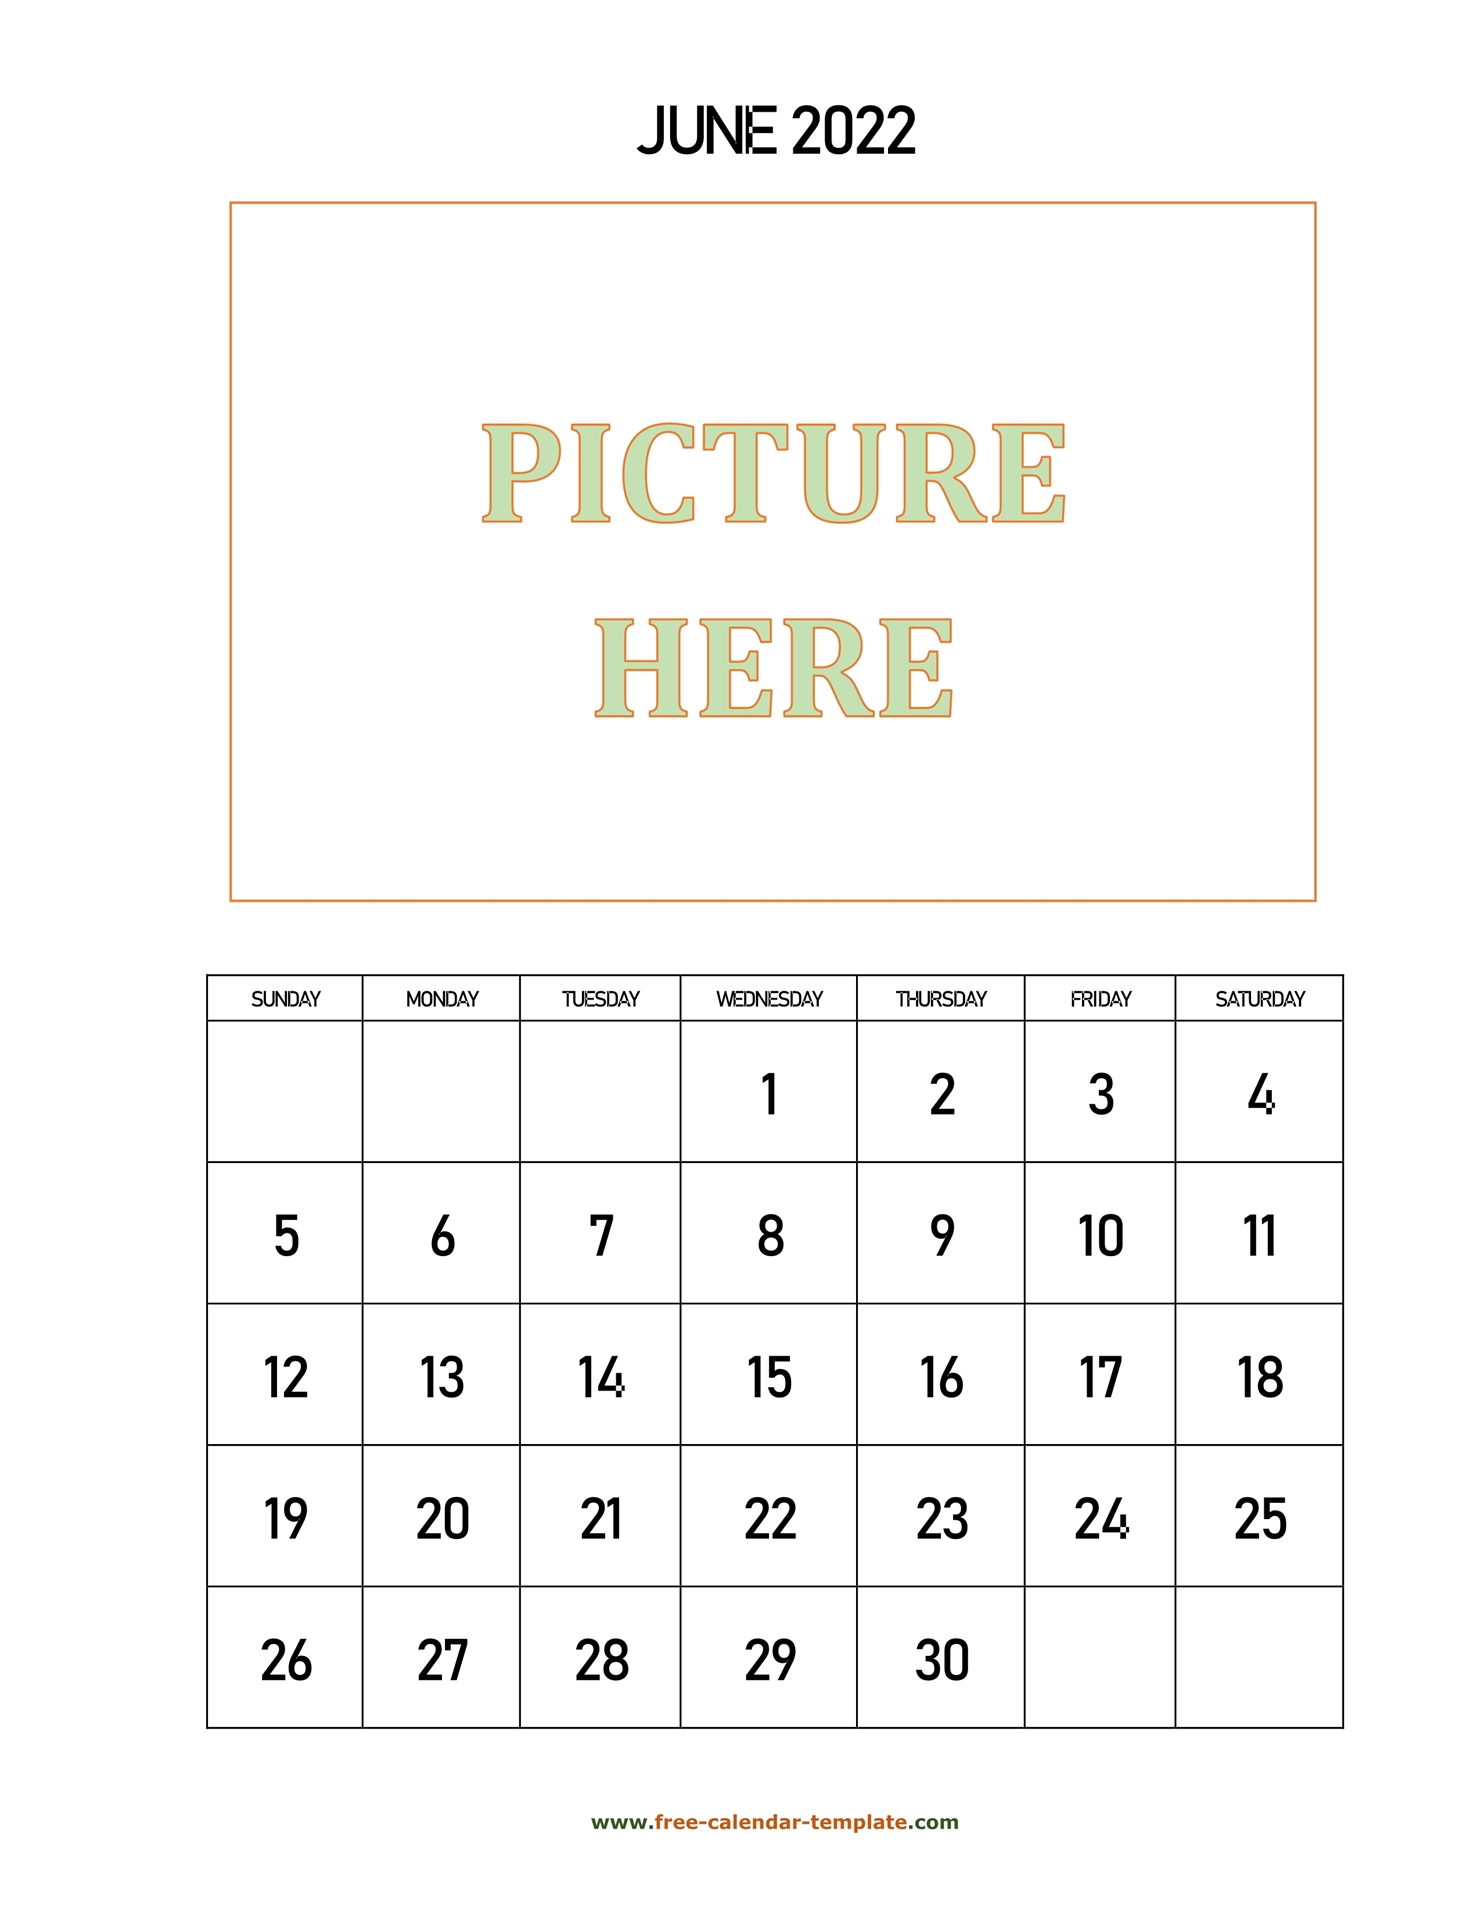 June Printable 2022 Calendar, Space For Add Picture